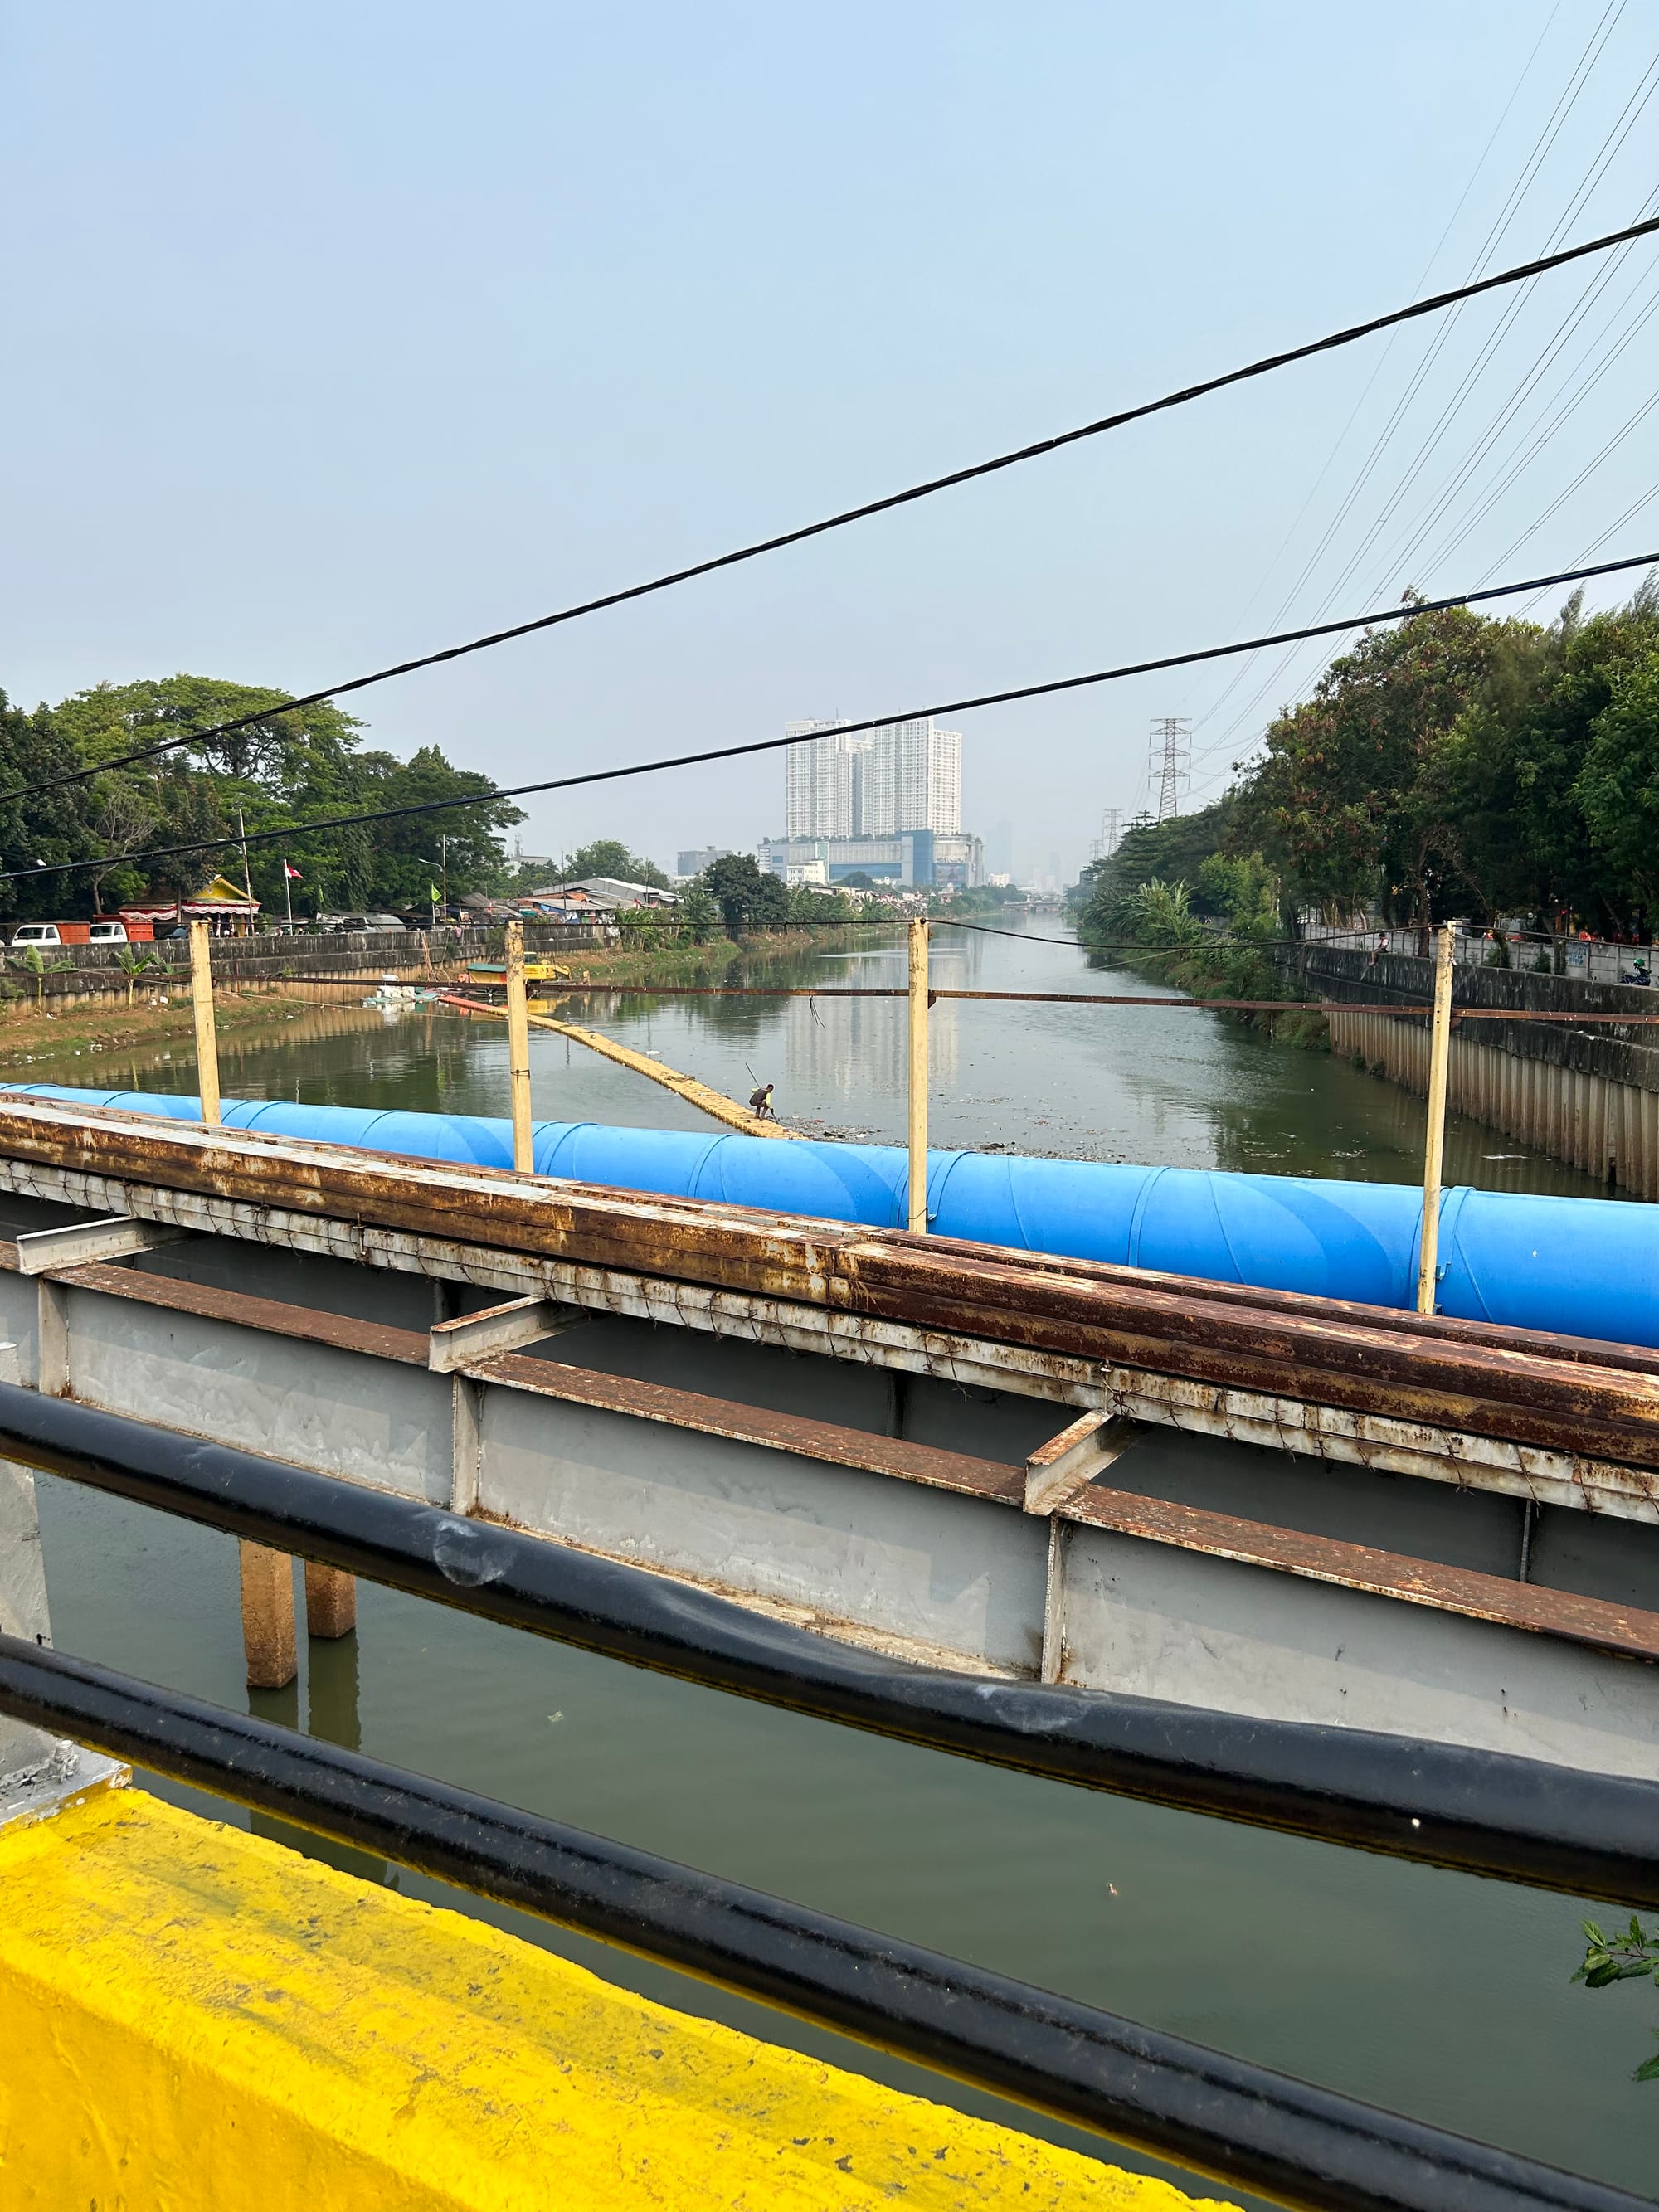 Jakarta: view from a rusty steel bridge with vivid yellow painted concrete walls. Beneath in the distance, a man on a narrow pontoon bridge holding a spear or net